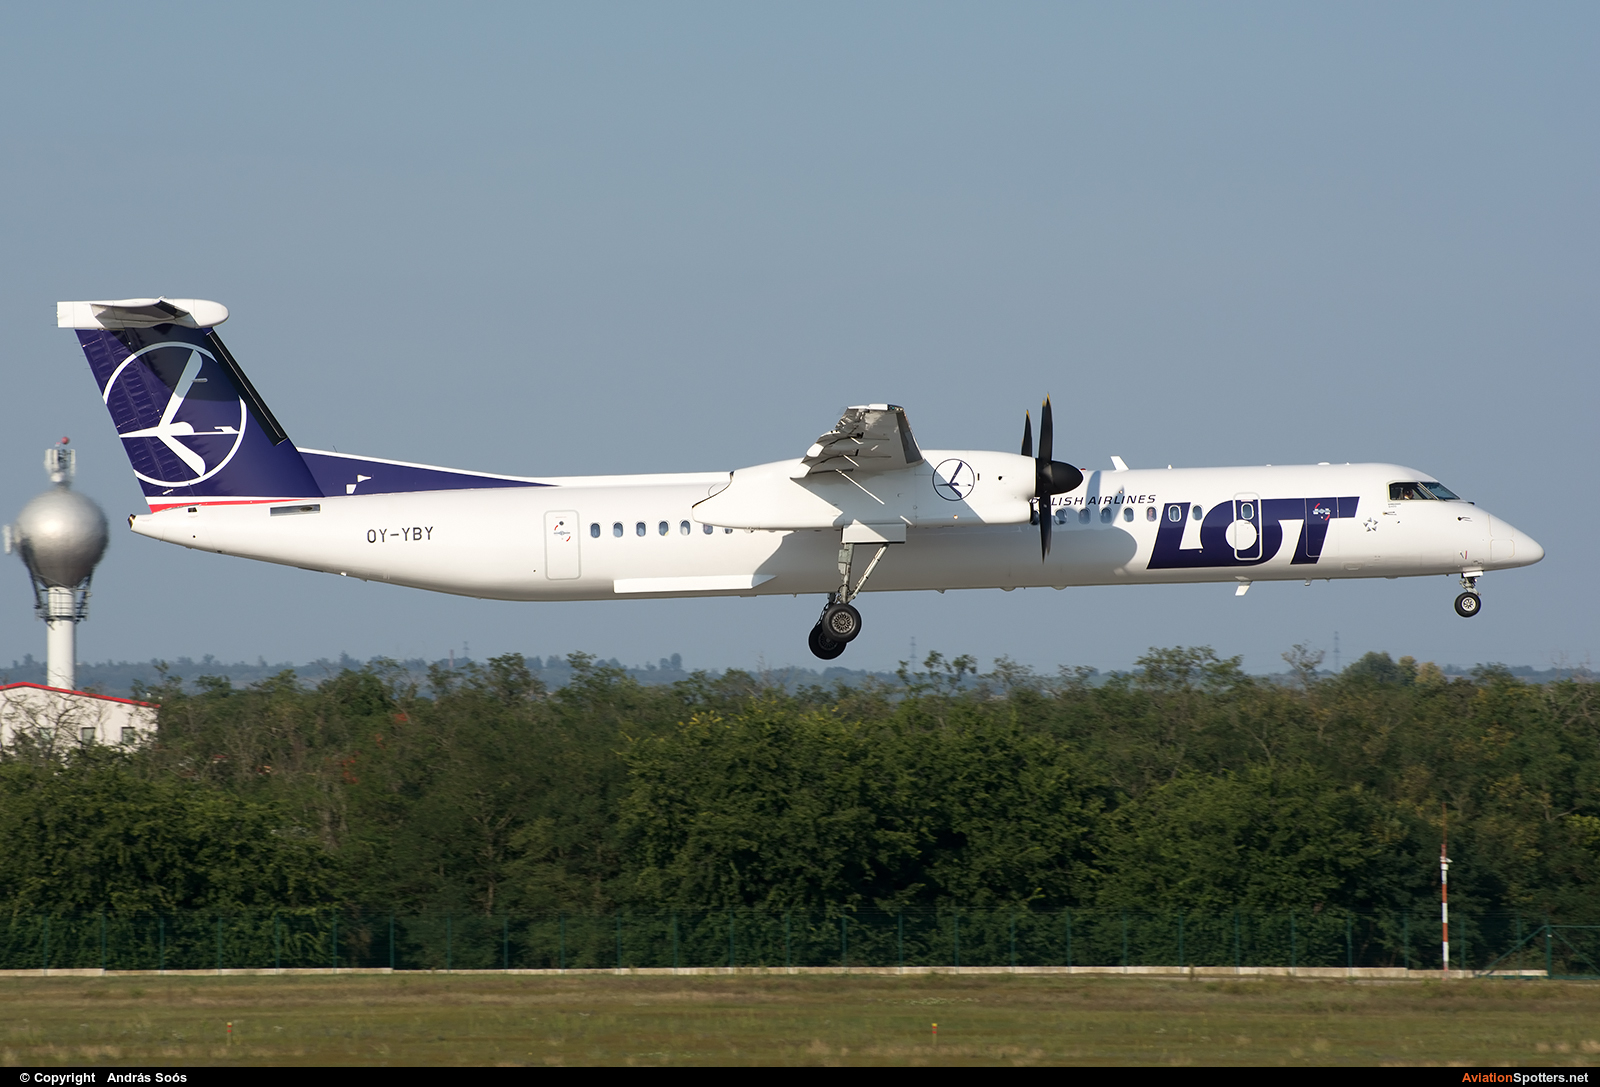 LOT - Polish Airlines  -  DHC-8-402Q Dash 8  (OY-YBY) By András Soós (sas1965)